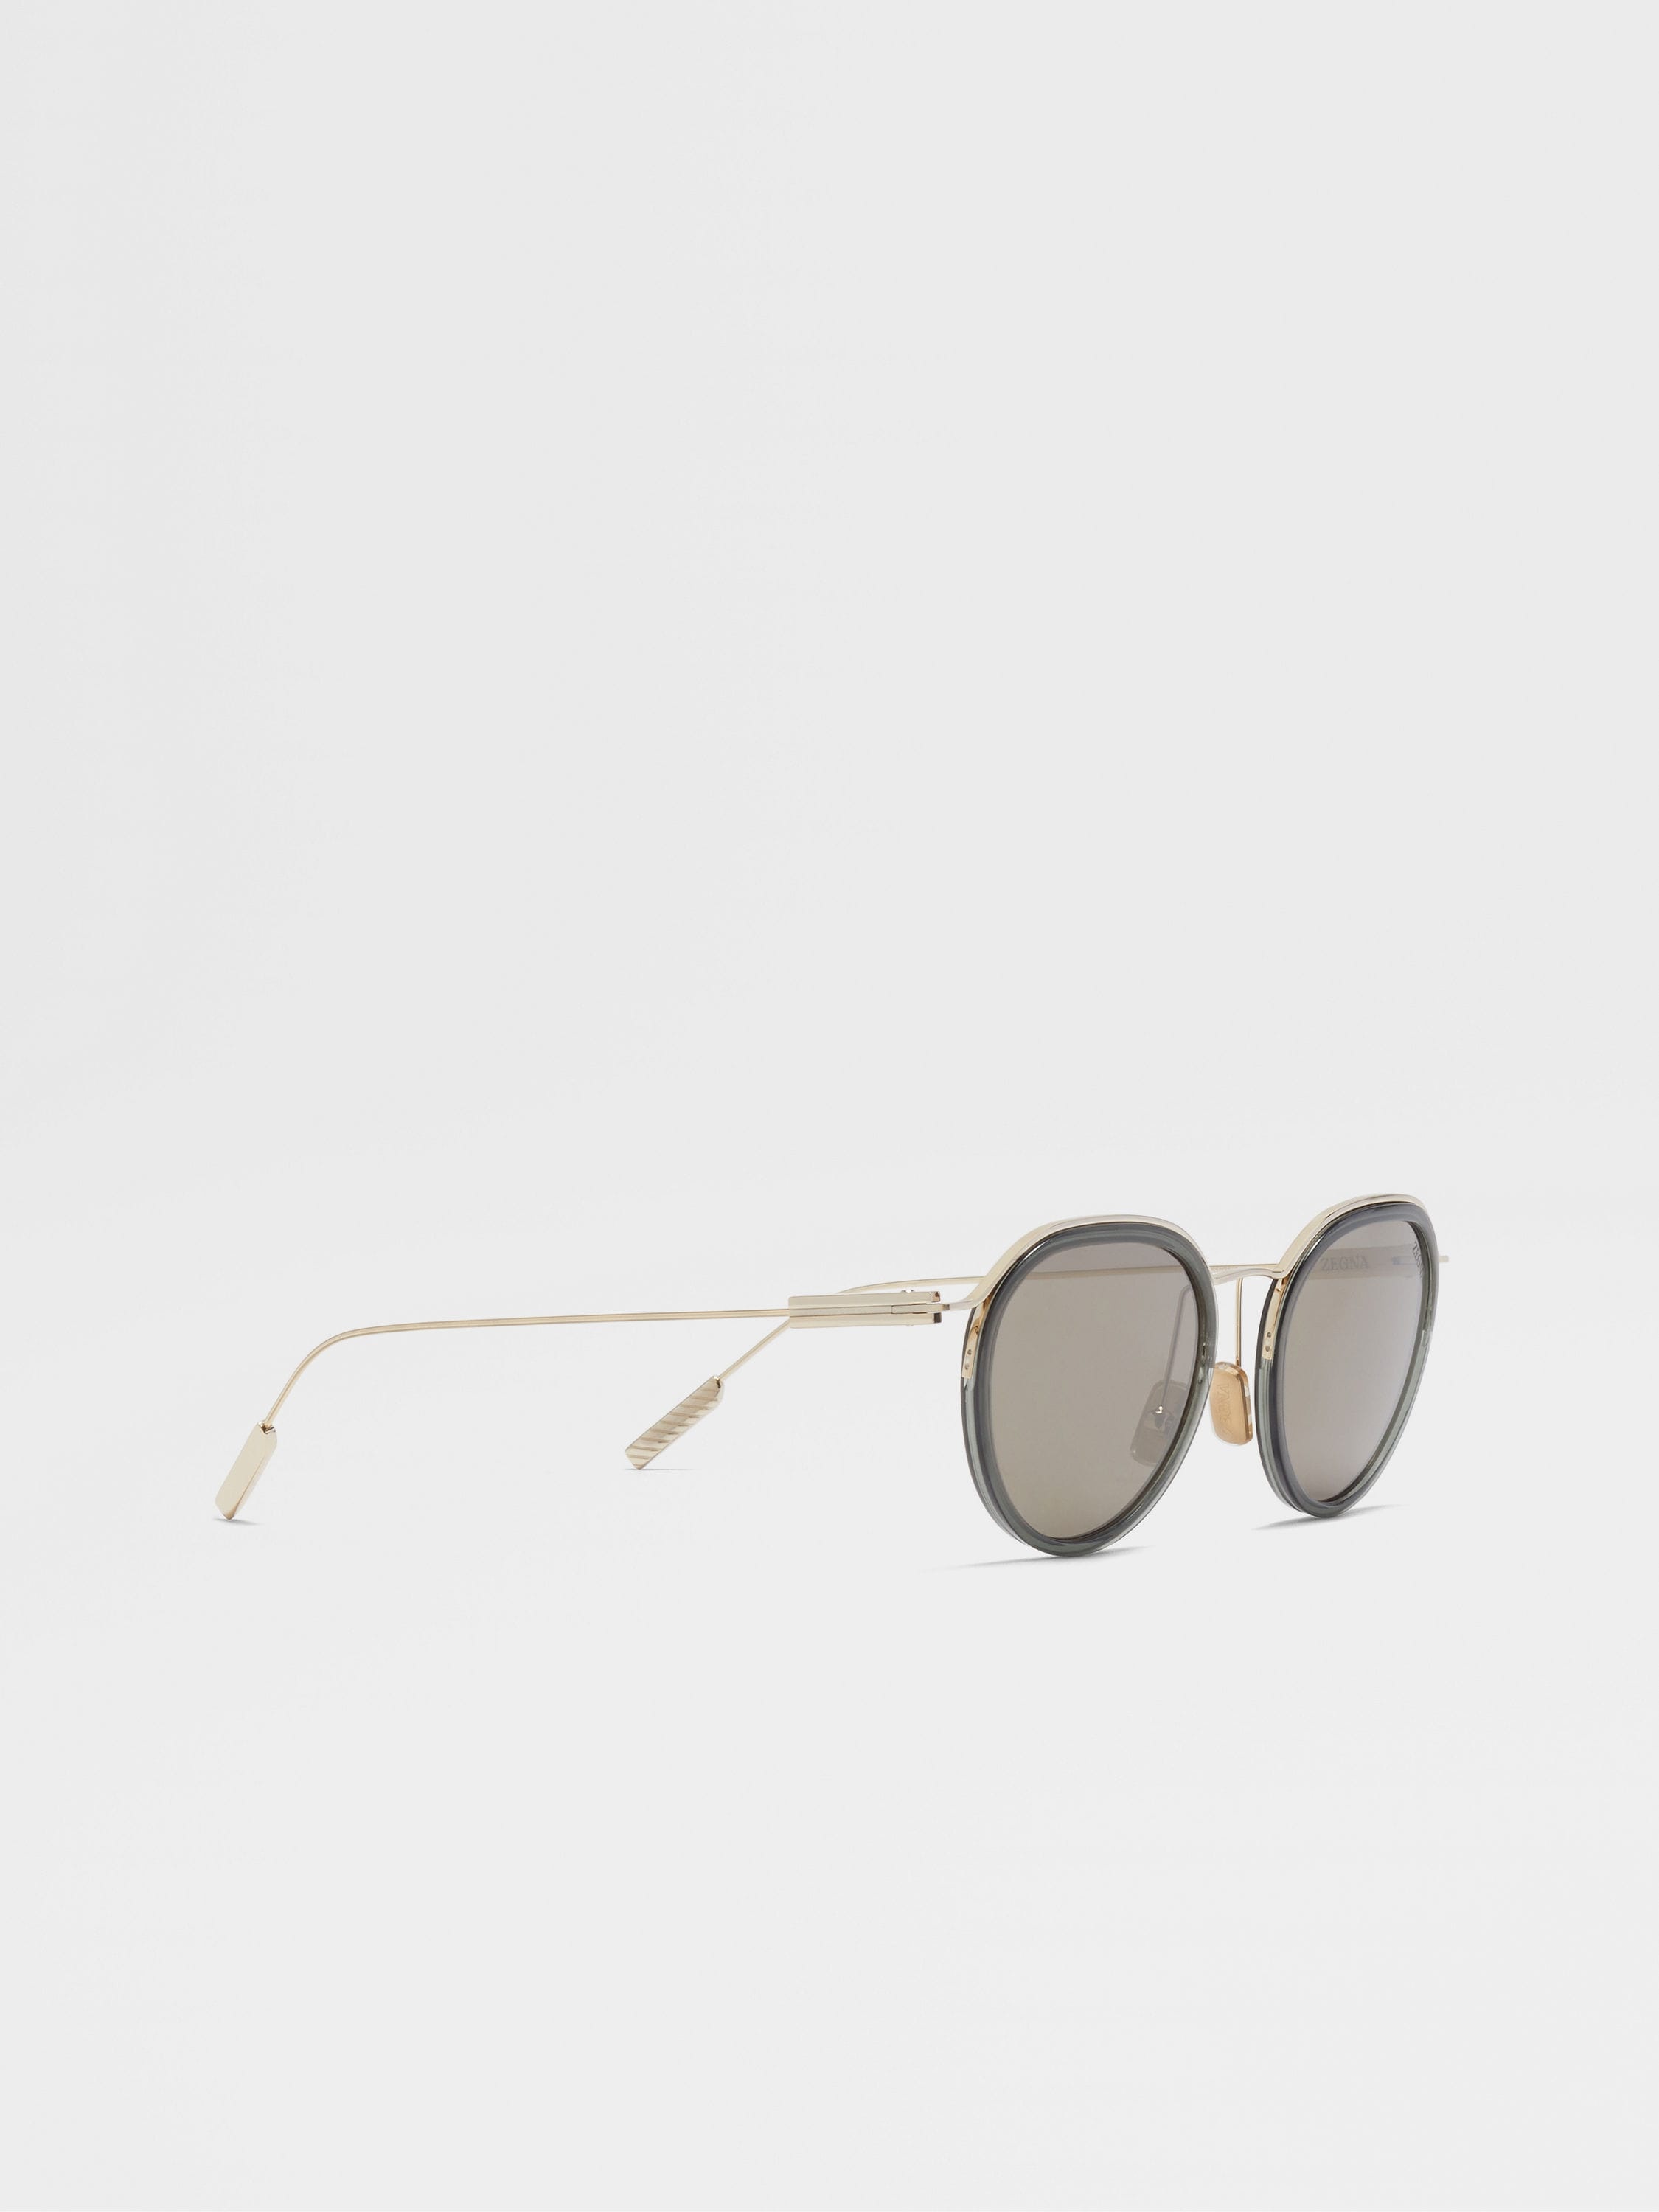 TRANSPARENT GREEN AND PALE GOLD ACETATE AND METAL SUNGLASSES - 3